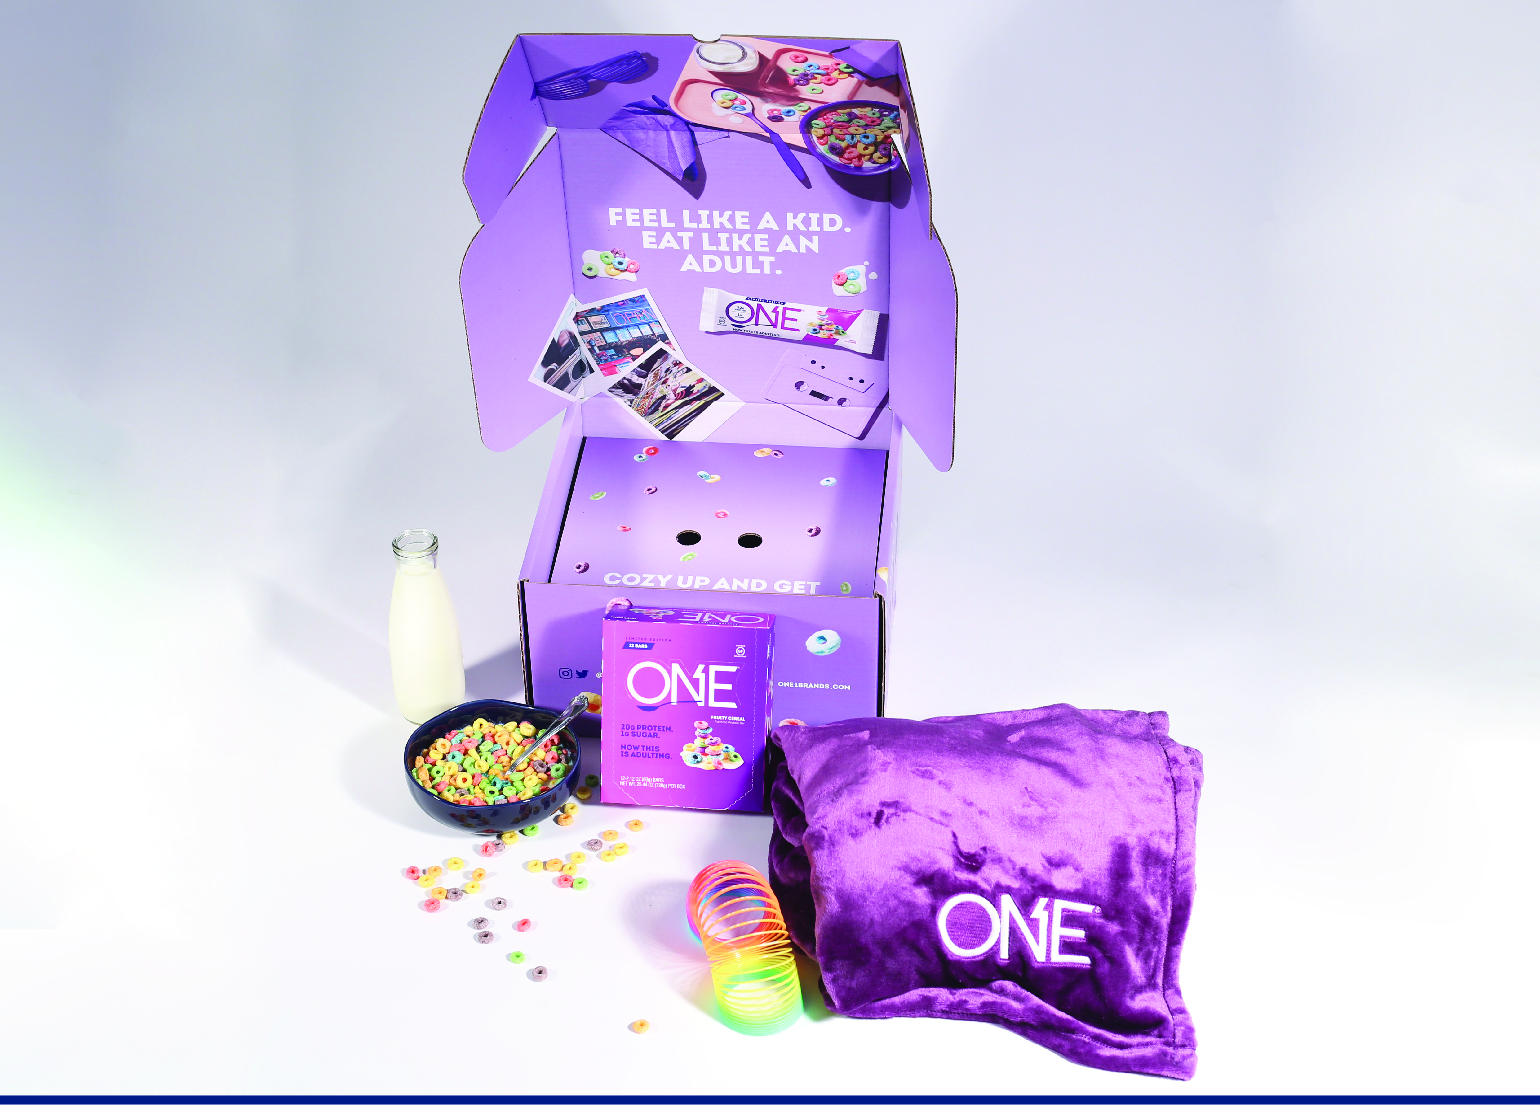 a purple blanket, slinky and bowl of cereal next to a purple box with the brand "One" bars on it